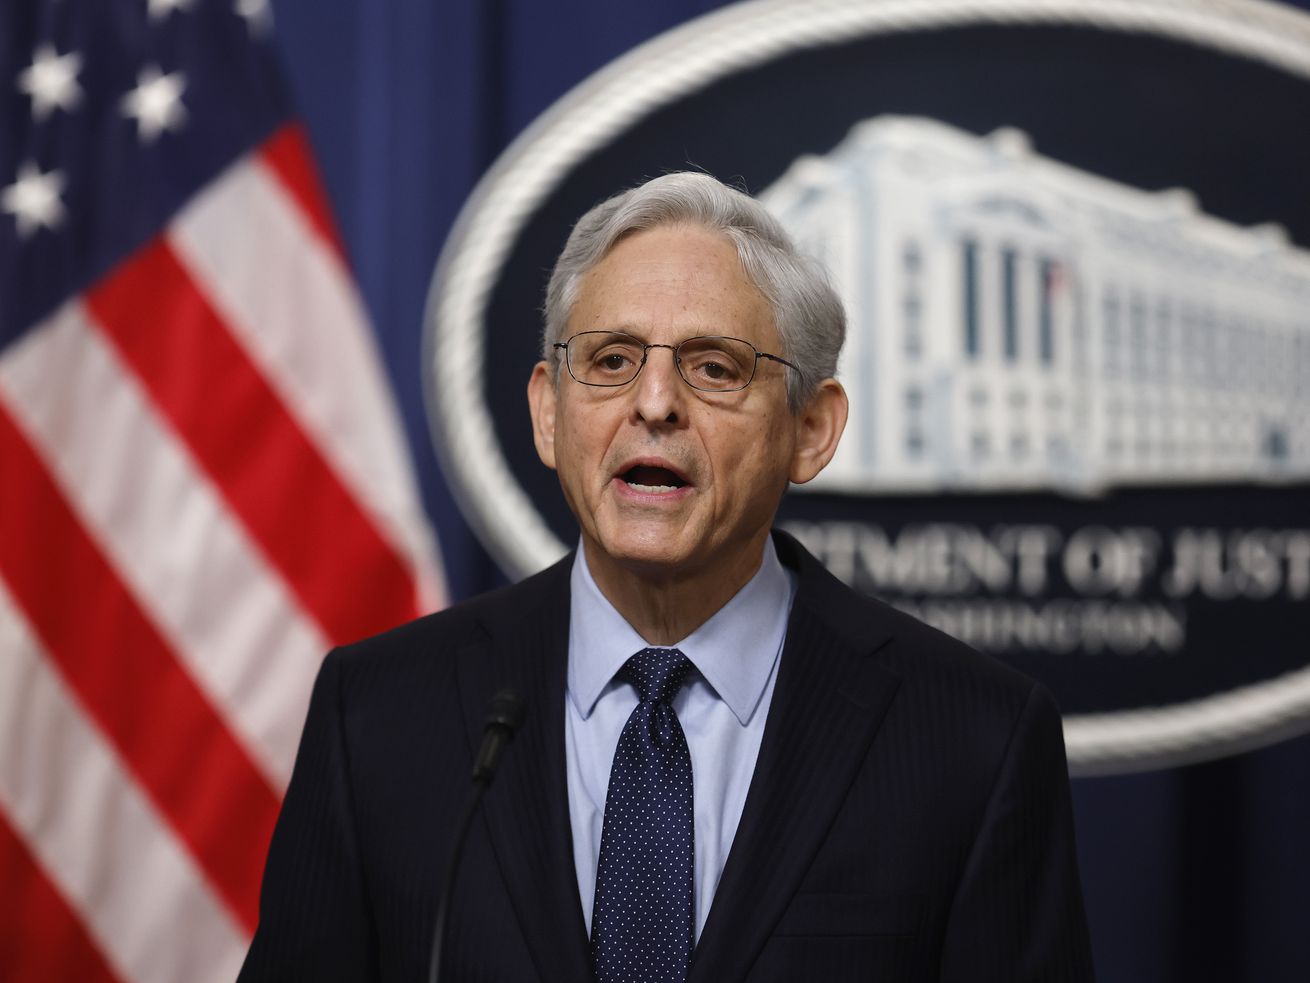 Attorney General Merrick Garland speaks in front of a large Department of Justice seal, flanked by a US flag.